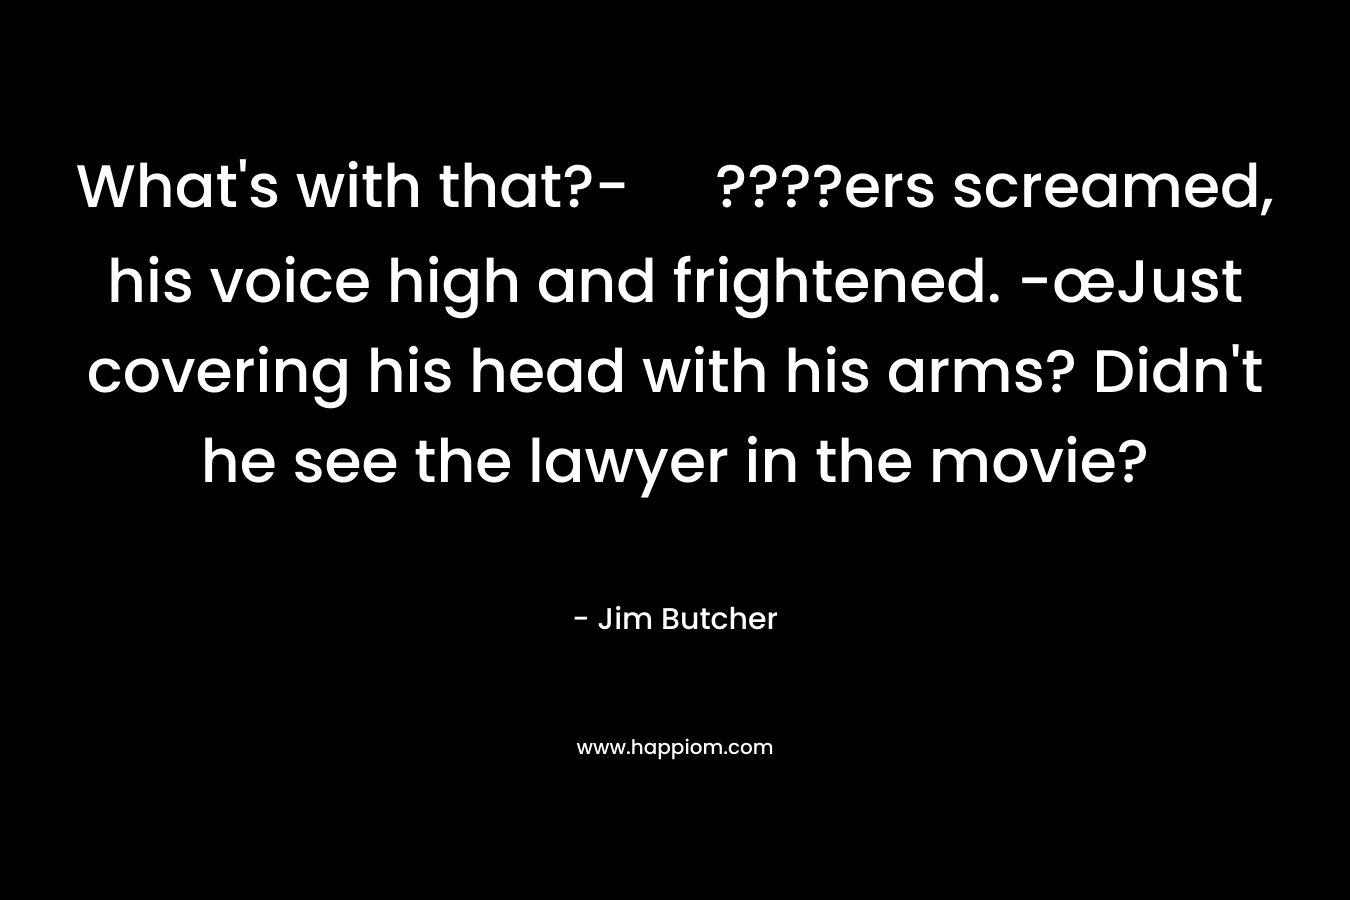 What’s with that?- ????ers screamed, his voice high and frightened. -œJust covering his head with his arms? Didn’t he see the lawyer in the movie? – Jim Butcher